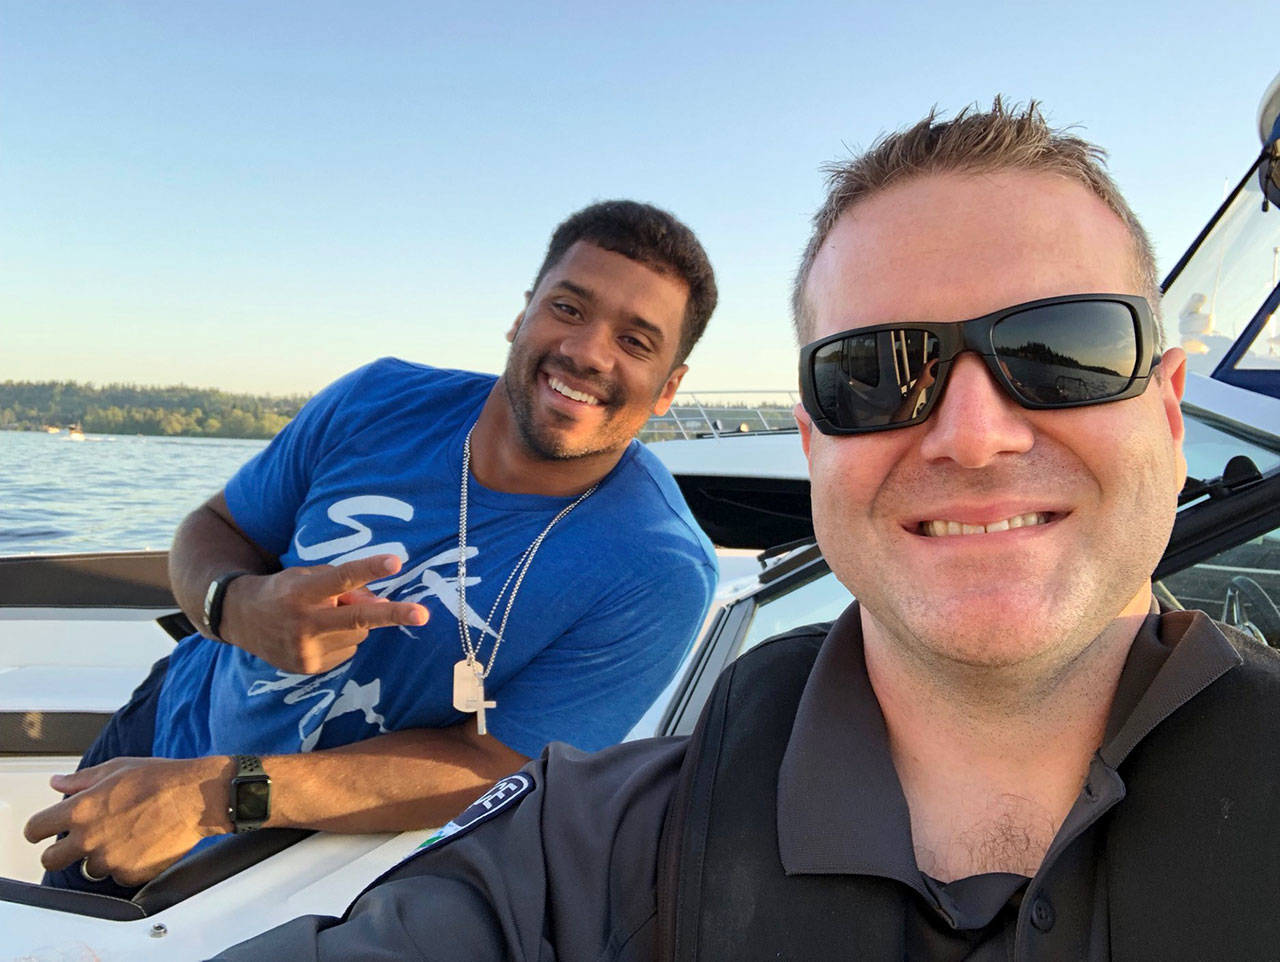 The Mercer Island Police Department posted a selfie with Russell Wilson on its Facebook page, writing that the officers “provided an assist for the big win” after helping the Seahawks quarterback with mechanical issues with his boat. Photo via Facebook